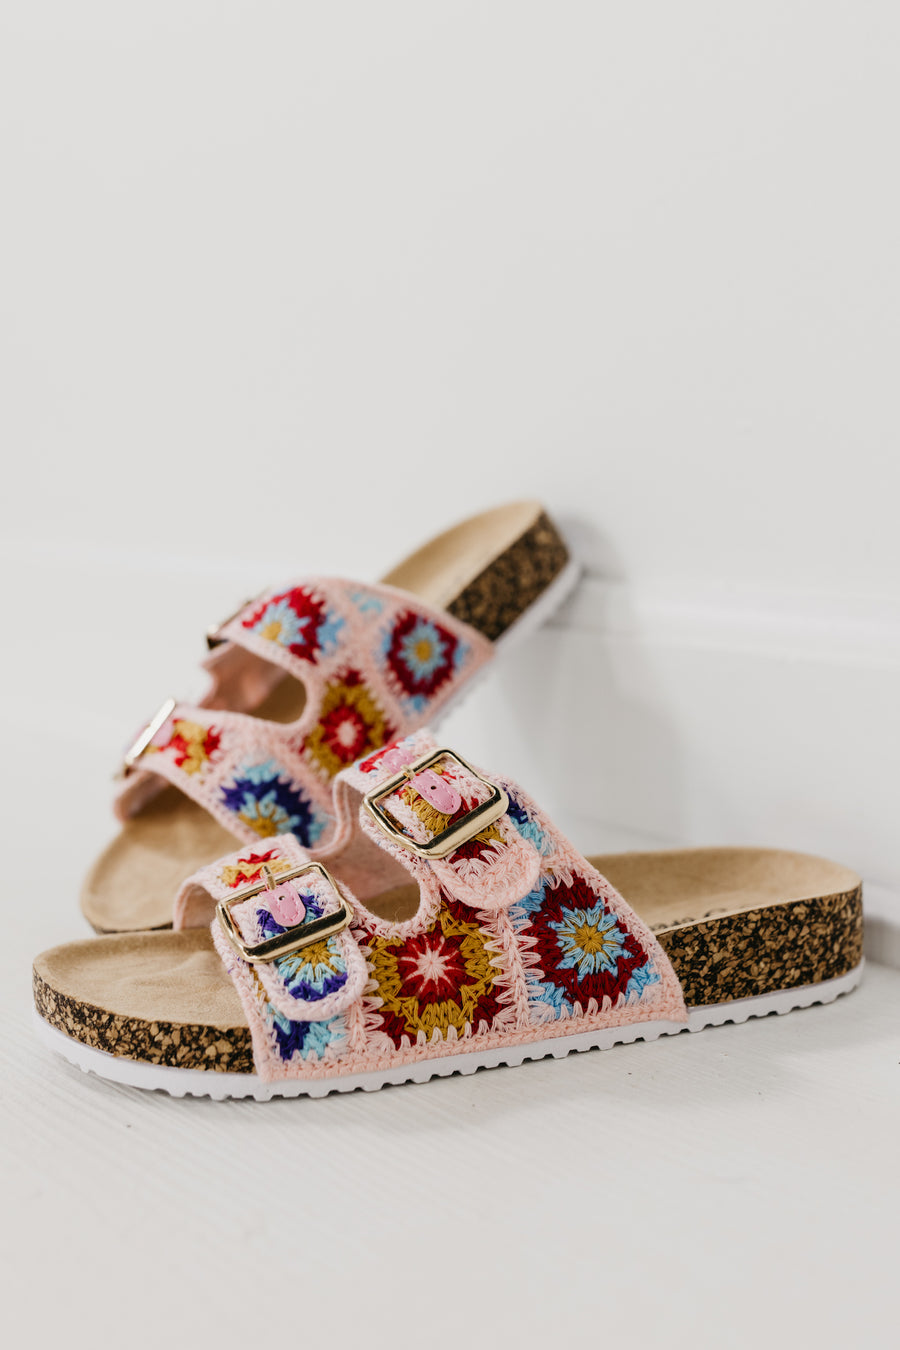 The Bacon Embroidered Sandal